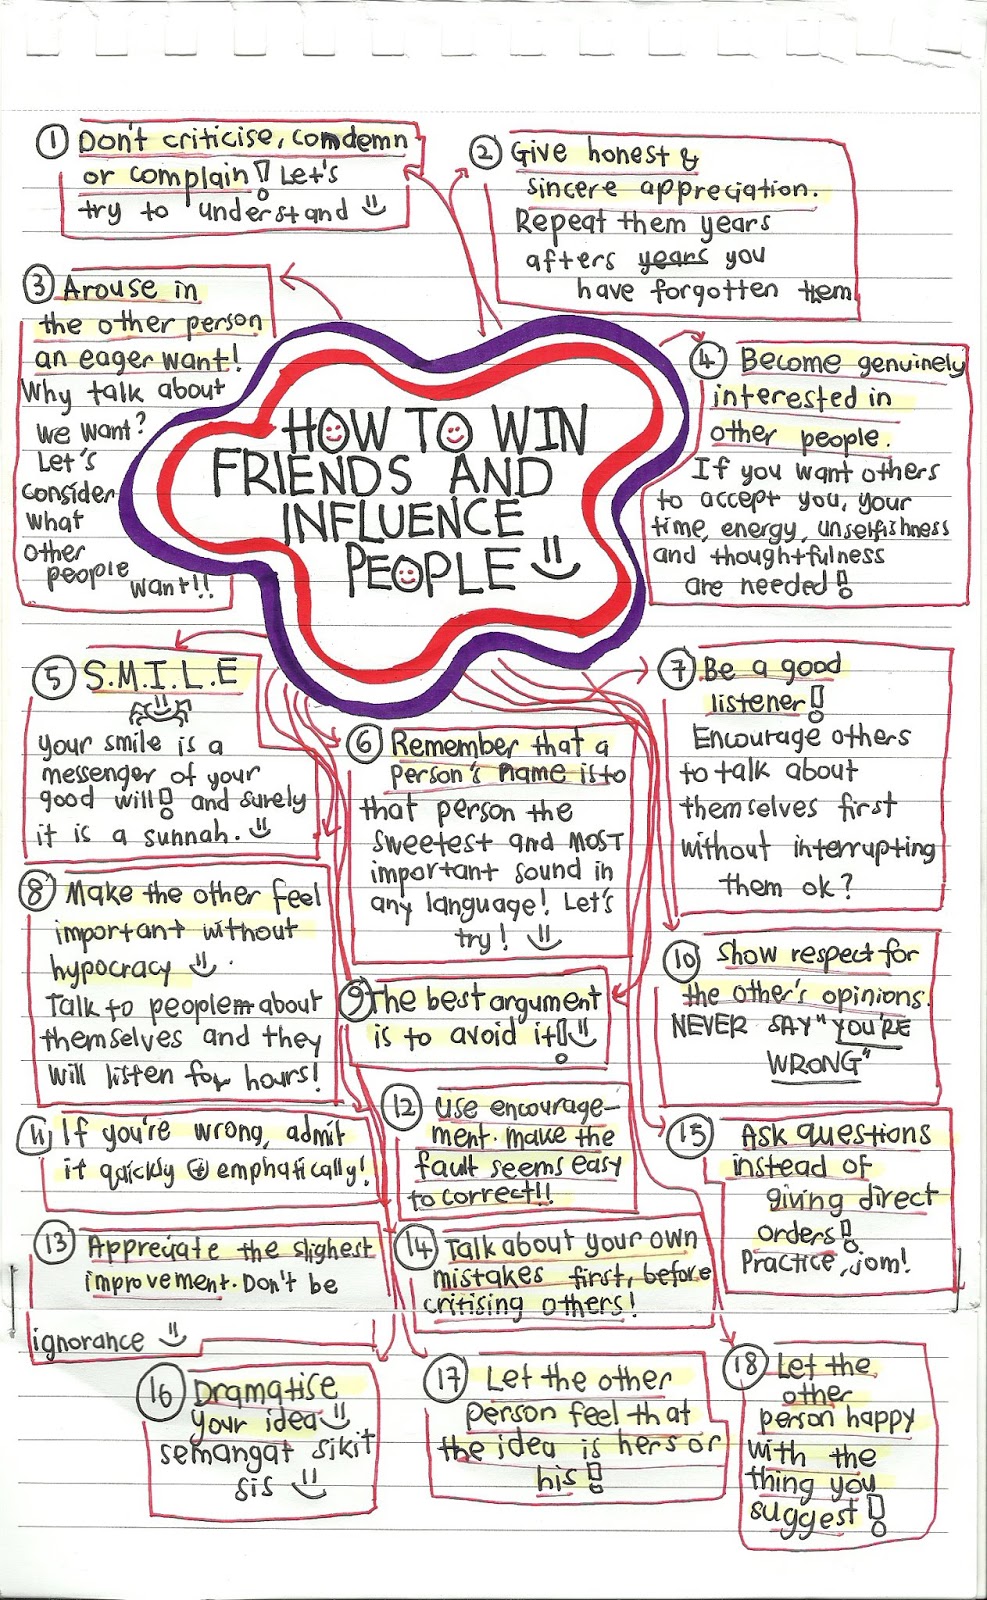 How To Win Friends and Influence People :)